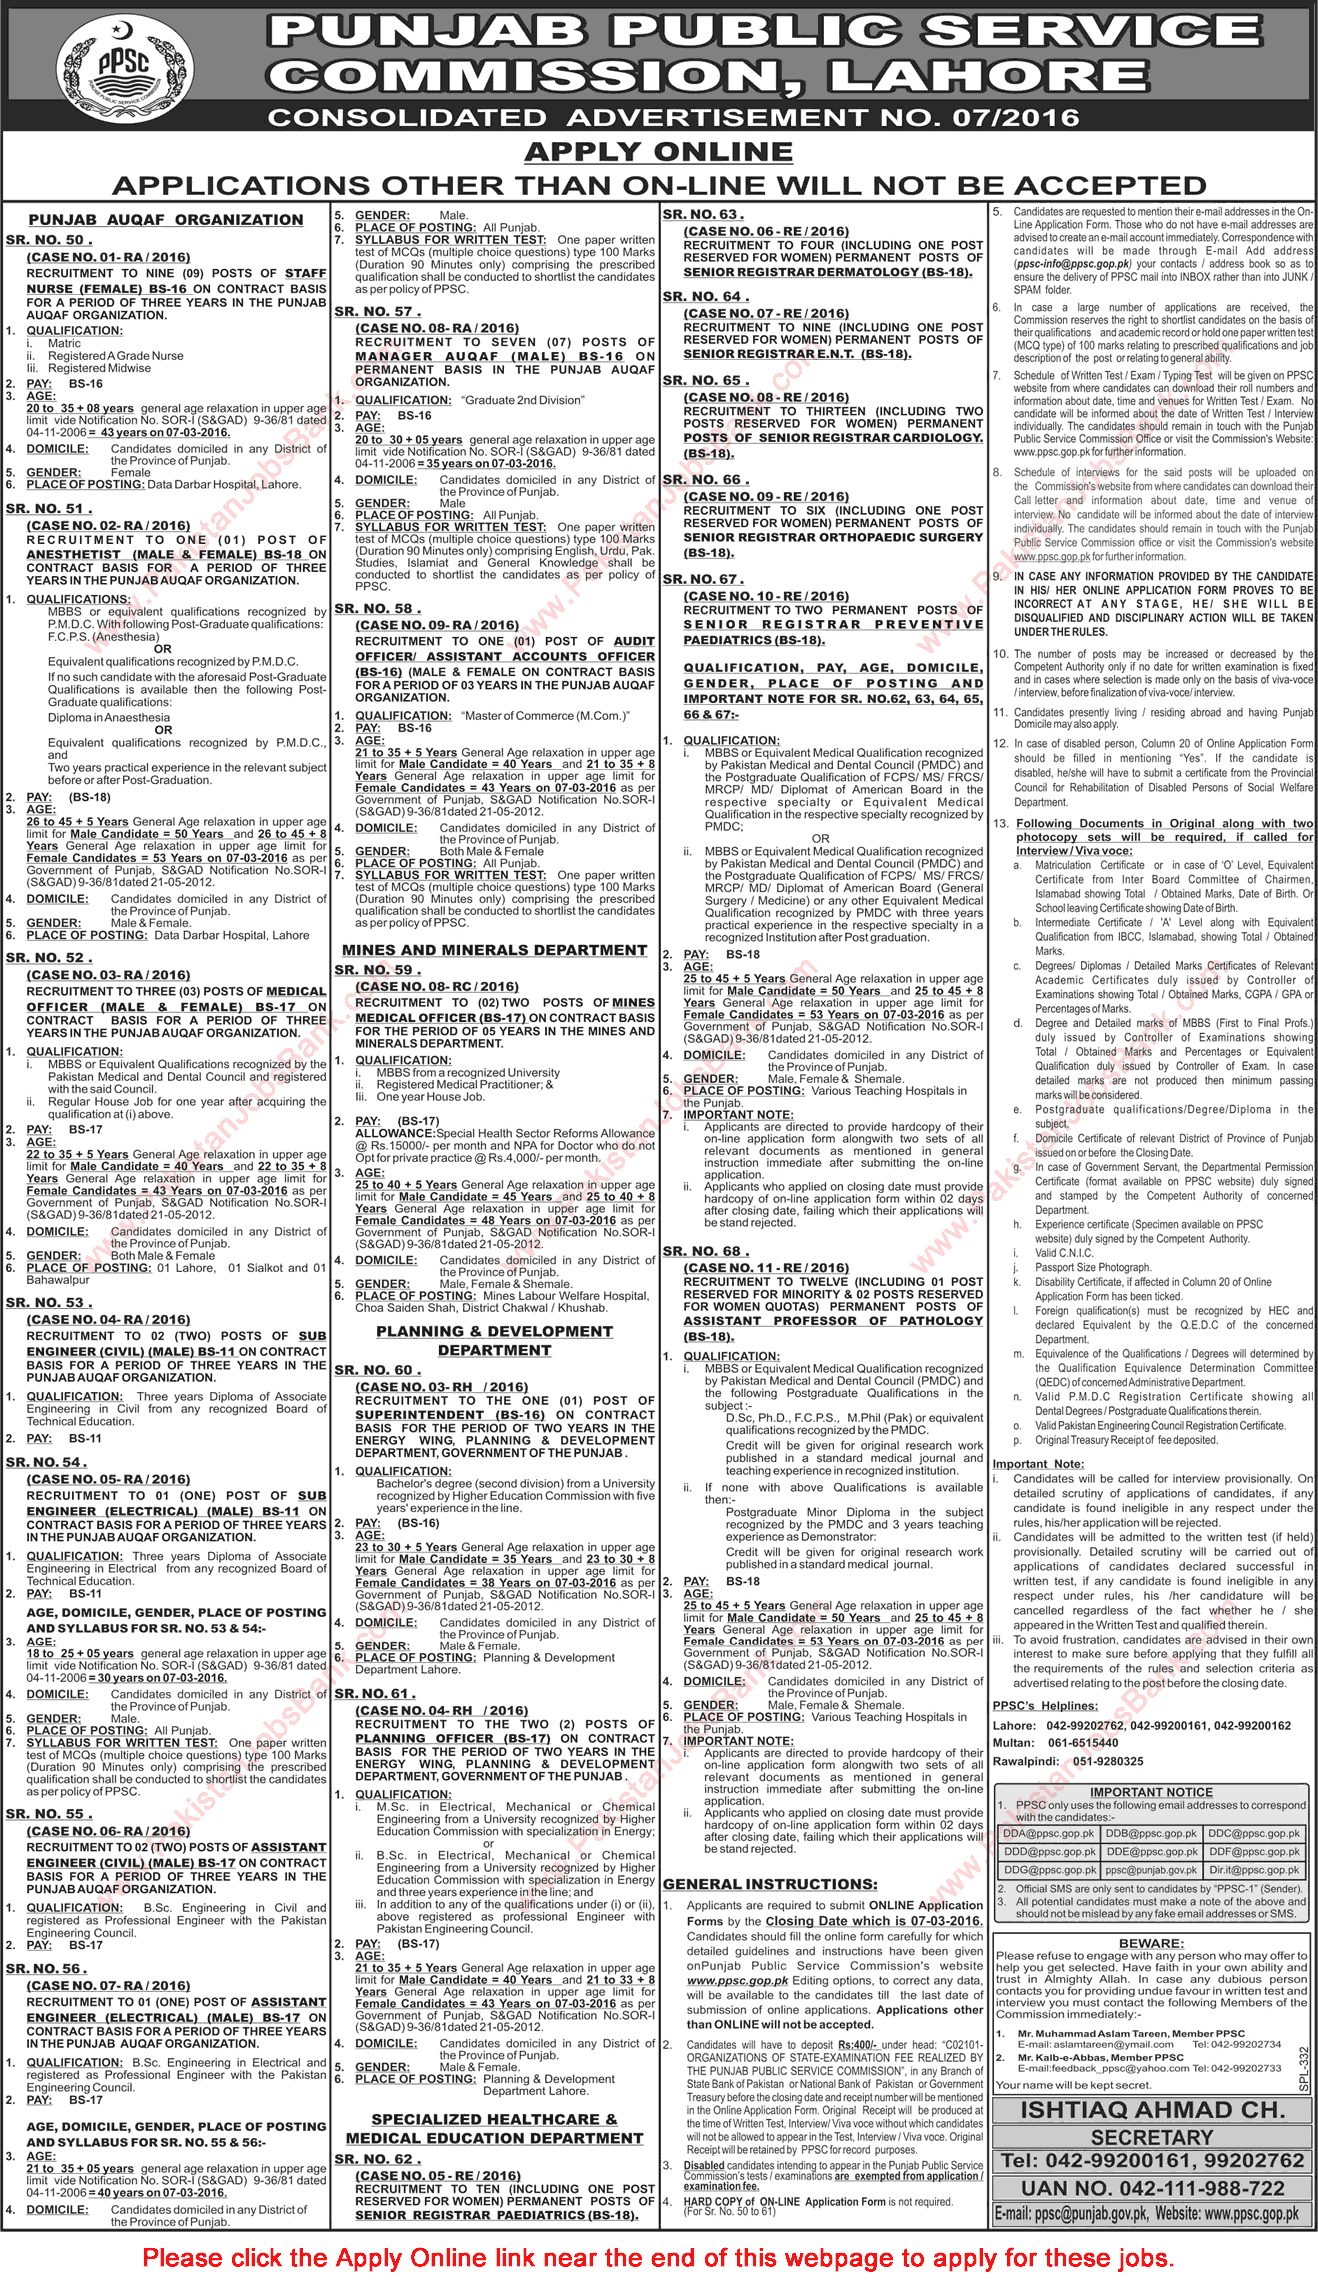 PPSC Jobs February 2016 Consolidated Advertisement No 07/2016 7/2016 Apply Online Latest